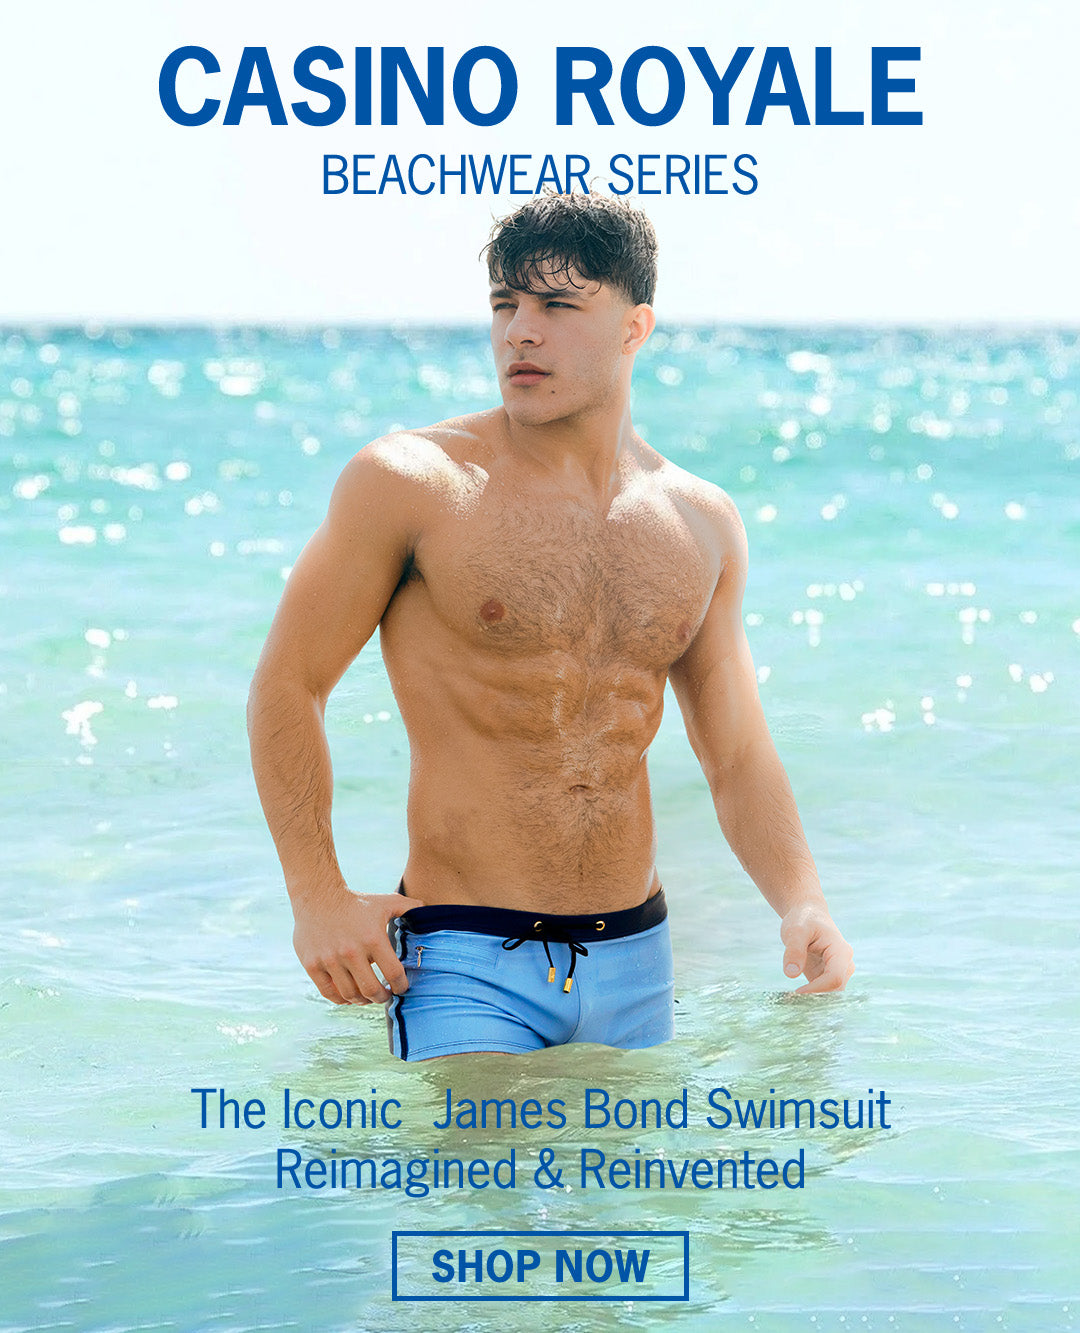 The new CASINO ROYALE Beachwear Series for men, featuring square-cut swim trunk swimsuit as seen worn by Daniel Craig in the James Bond 007 movie.